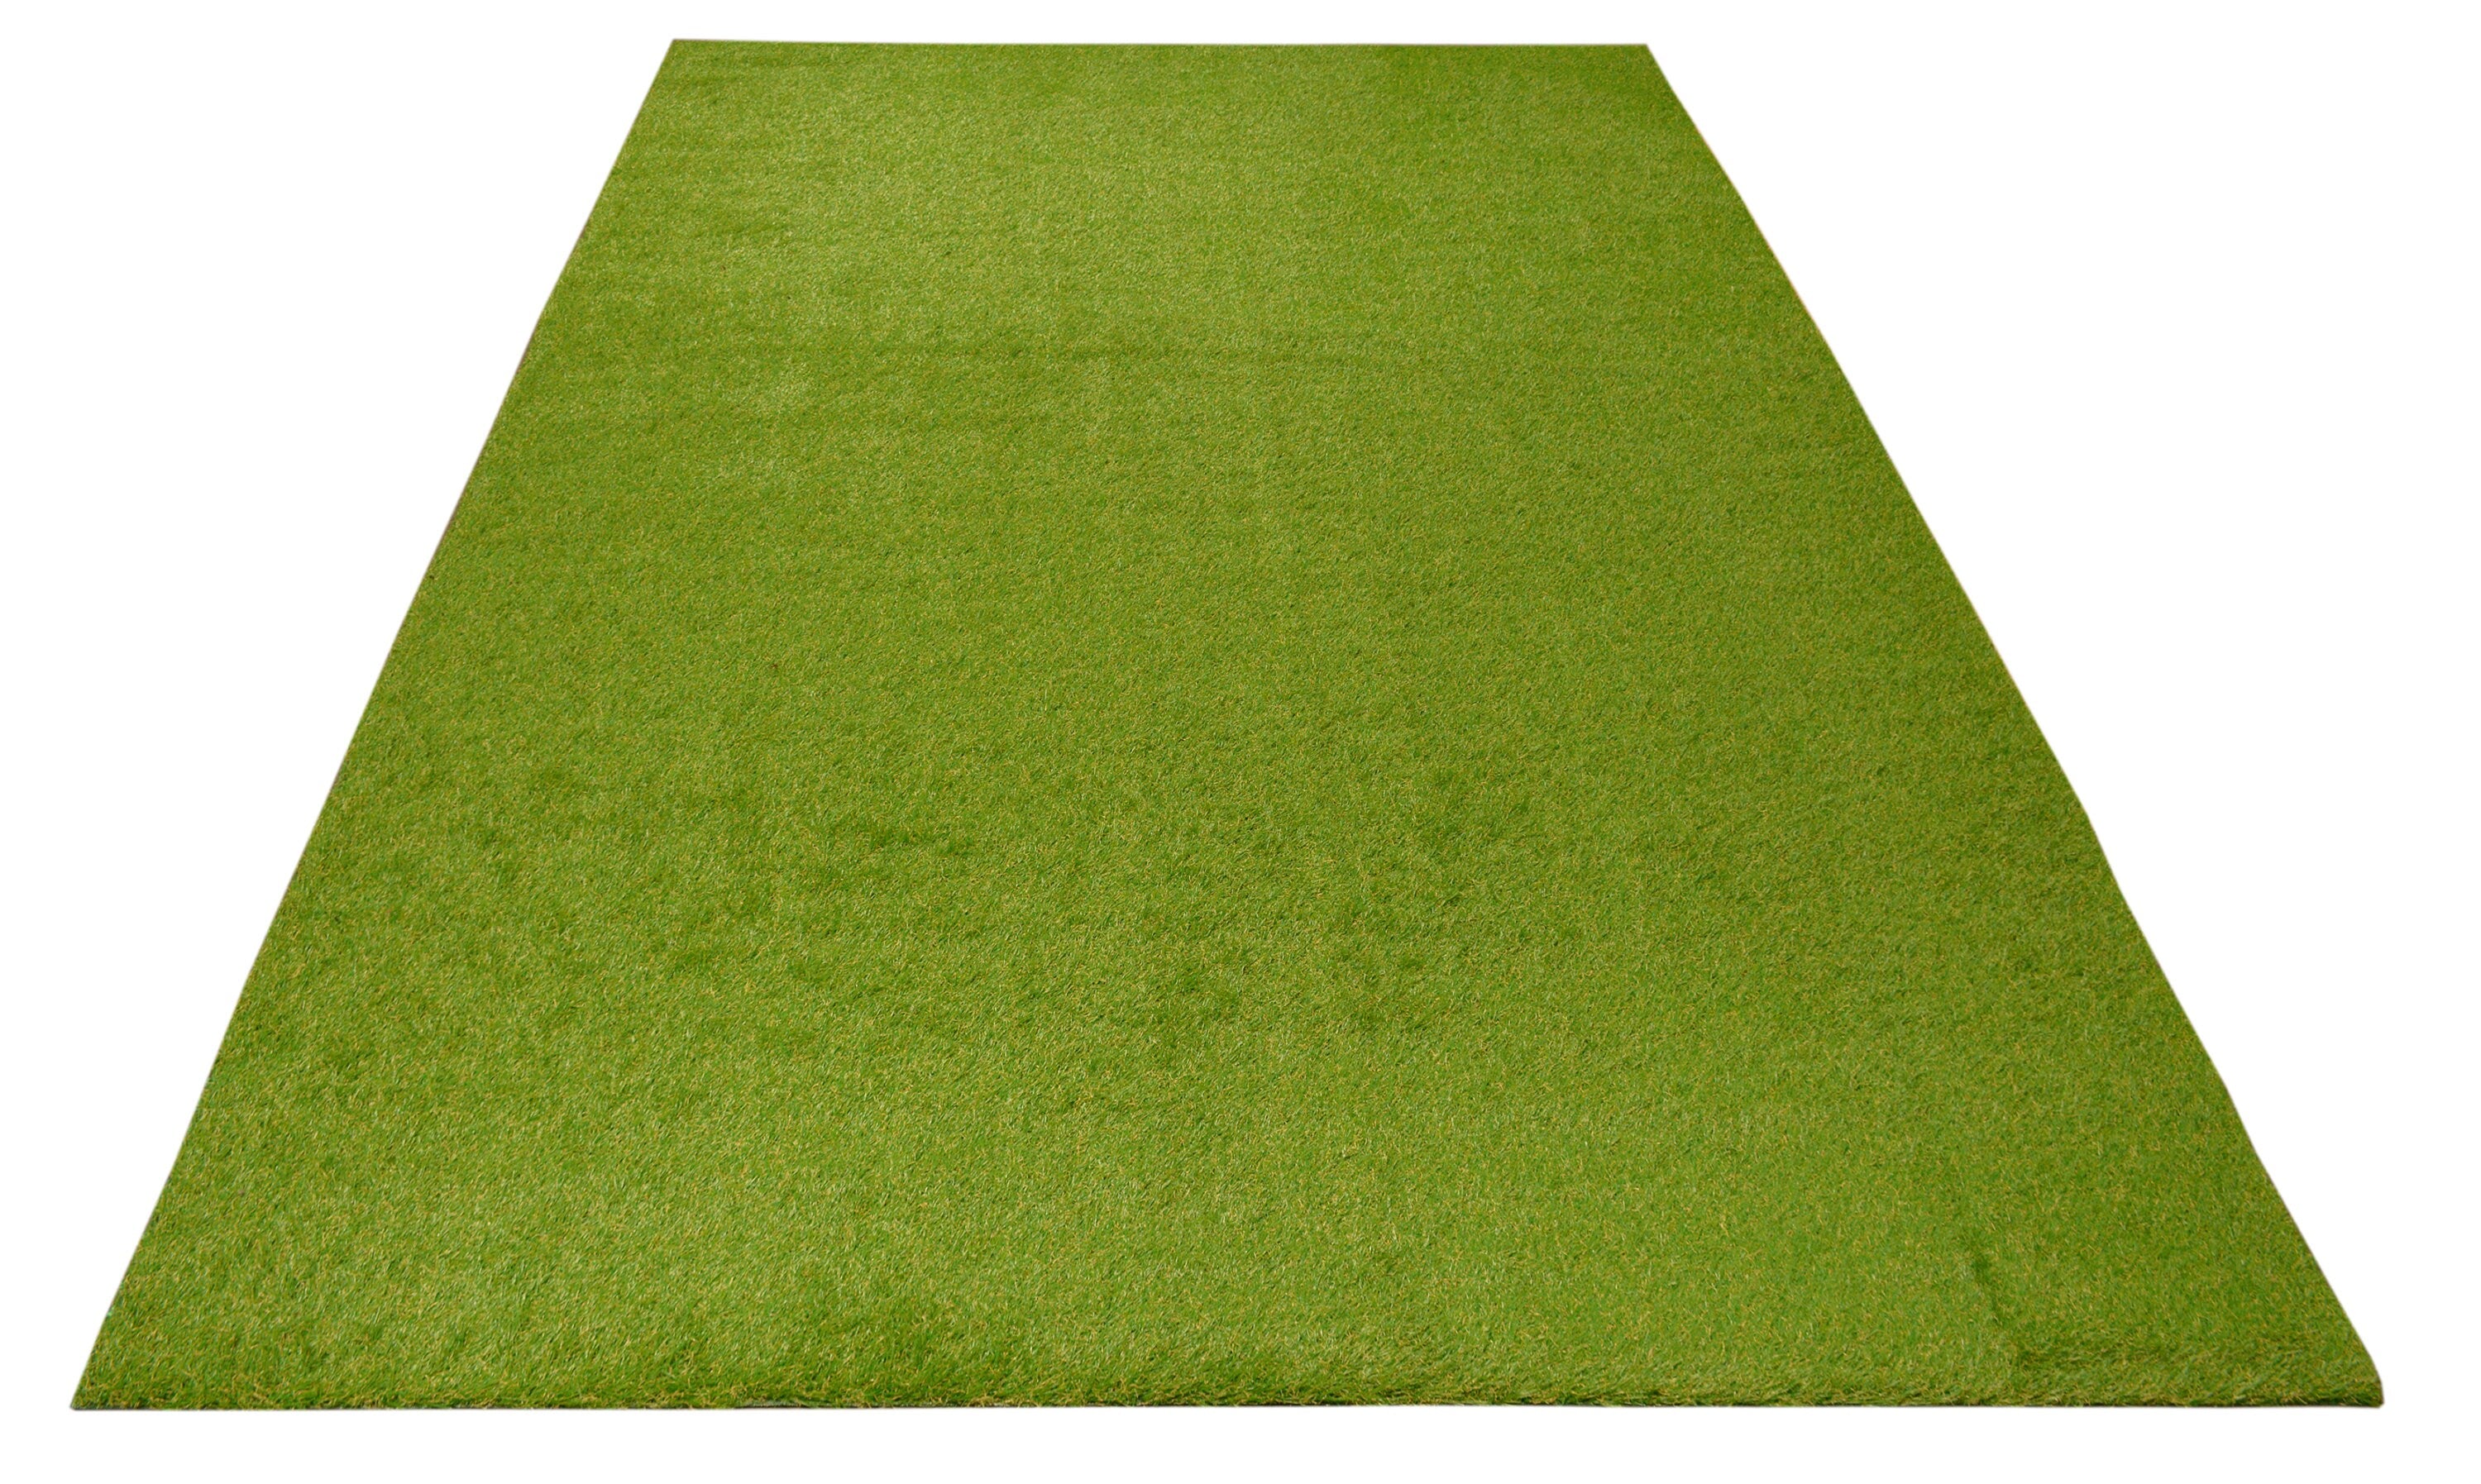 Custom Size Indoor / Outdoor Congrass Natural Look Turf Grass Runner Rug Carpet With Water Hole UV Protected Customize Turf Rug 79" Width - 0